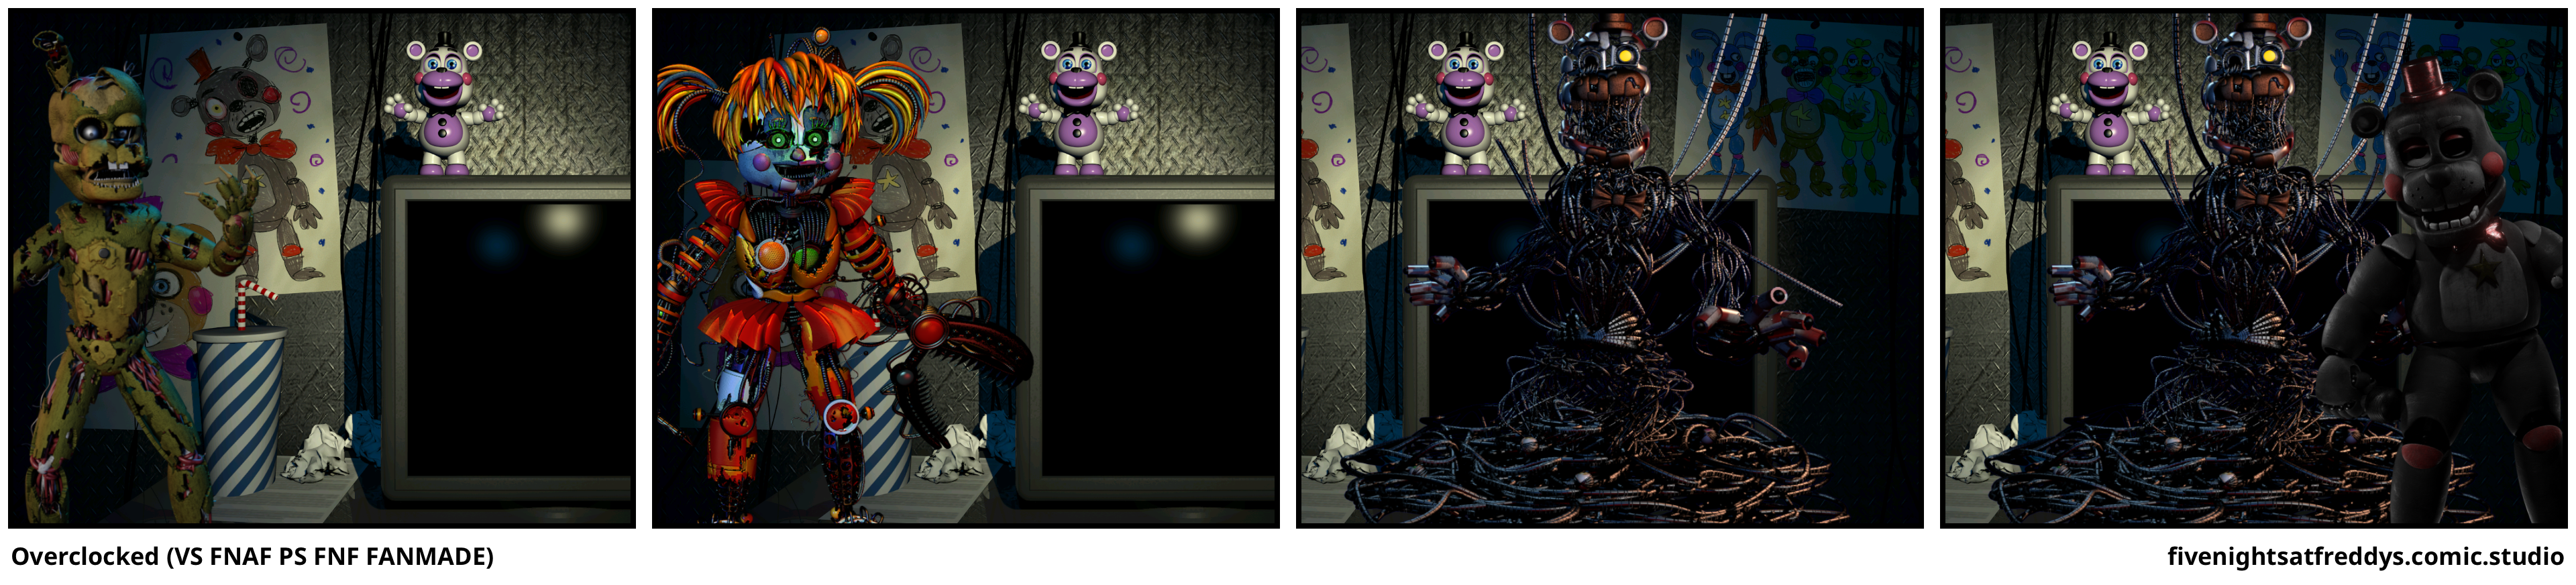 Overclocked (VS FNAF PS FNF FANMADE) 